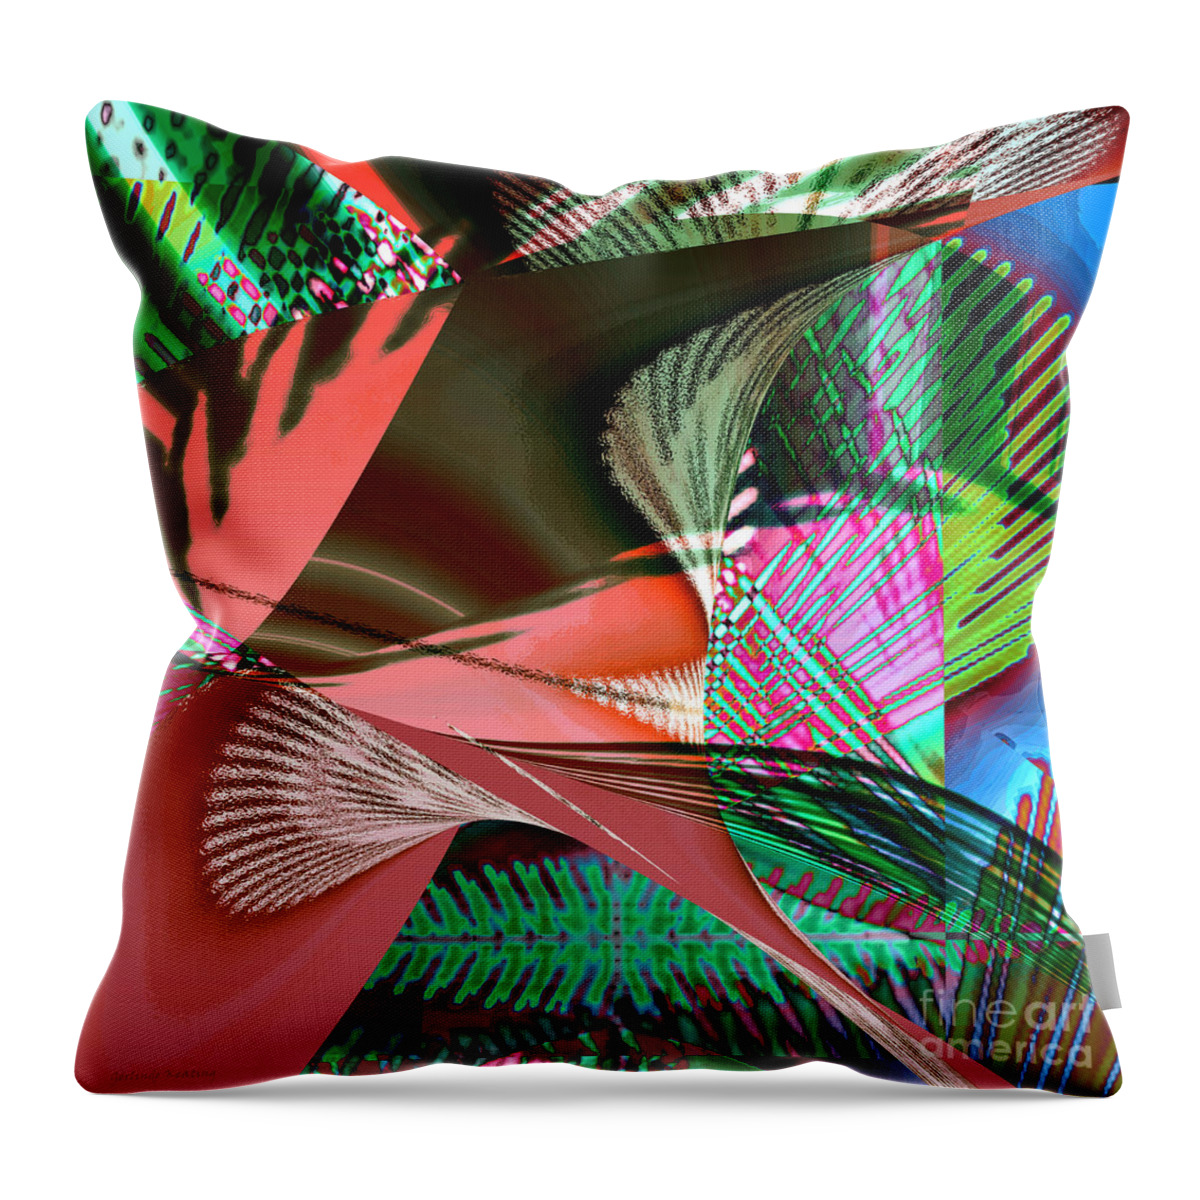 Abstract Throw Pillow featuring the digital art Fusion of Colors by Gerlinde Keating